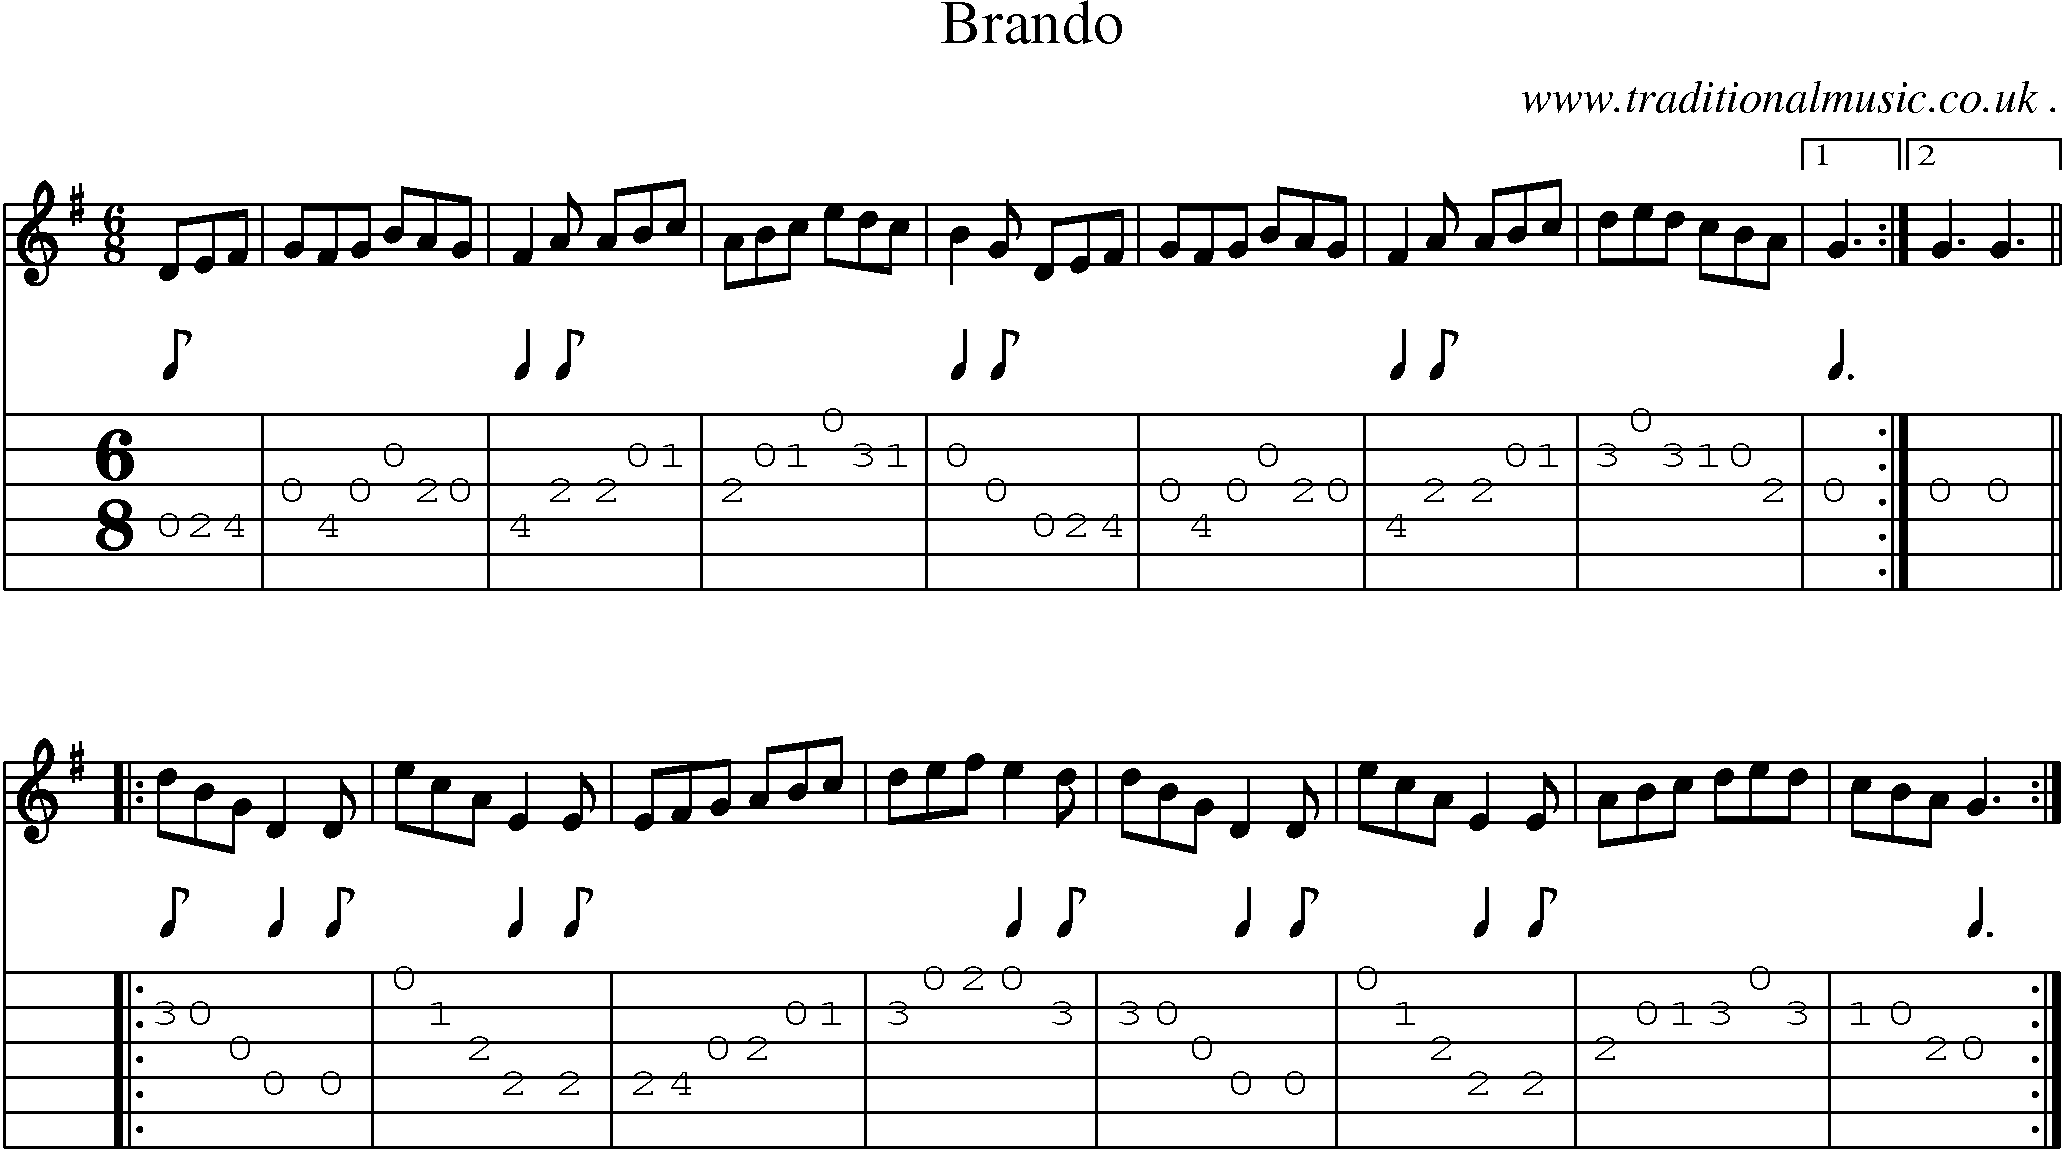 Sheet-Music and Guitar Tabs for Brando